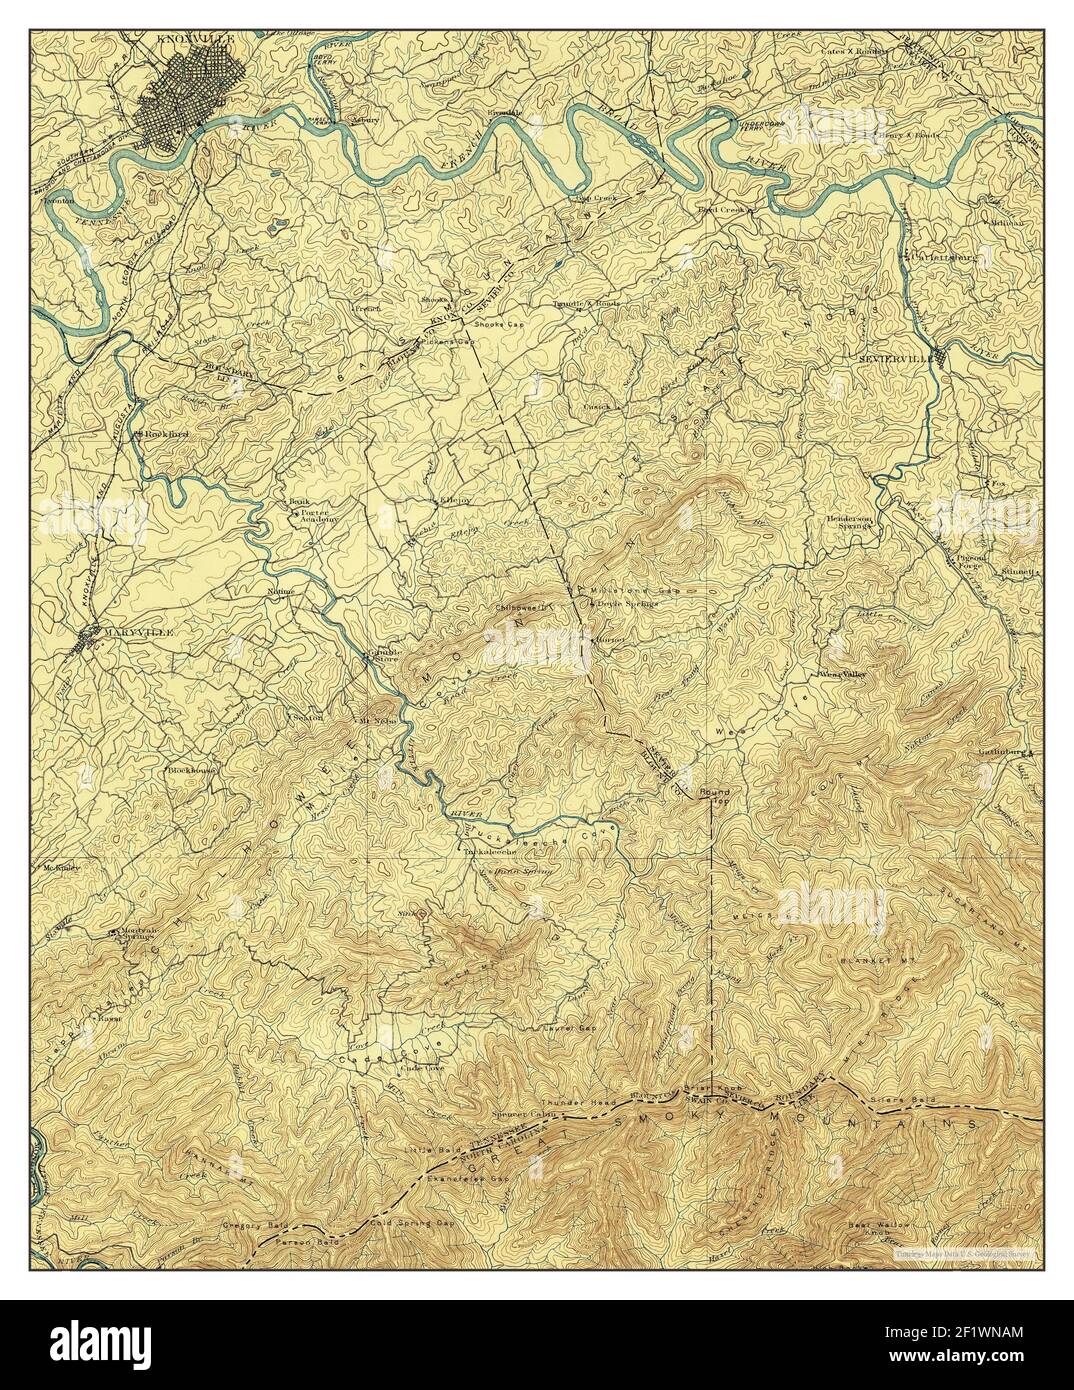 Knoxville, Tennessee, map 1895, 1:125000, United States of America by Timeless Maps, data U.S. Geological Survey Stock Photo